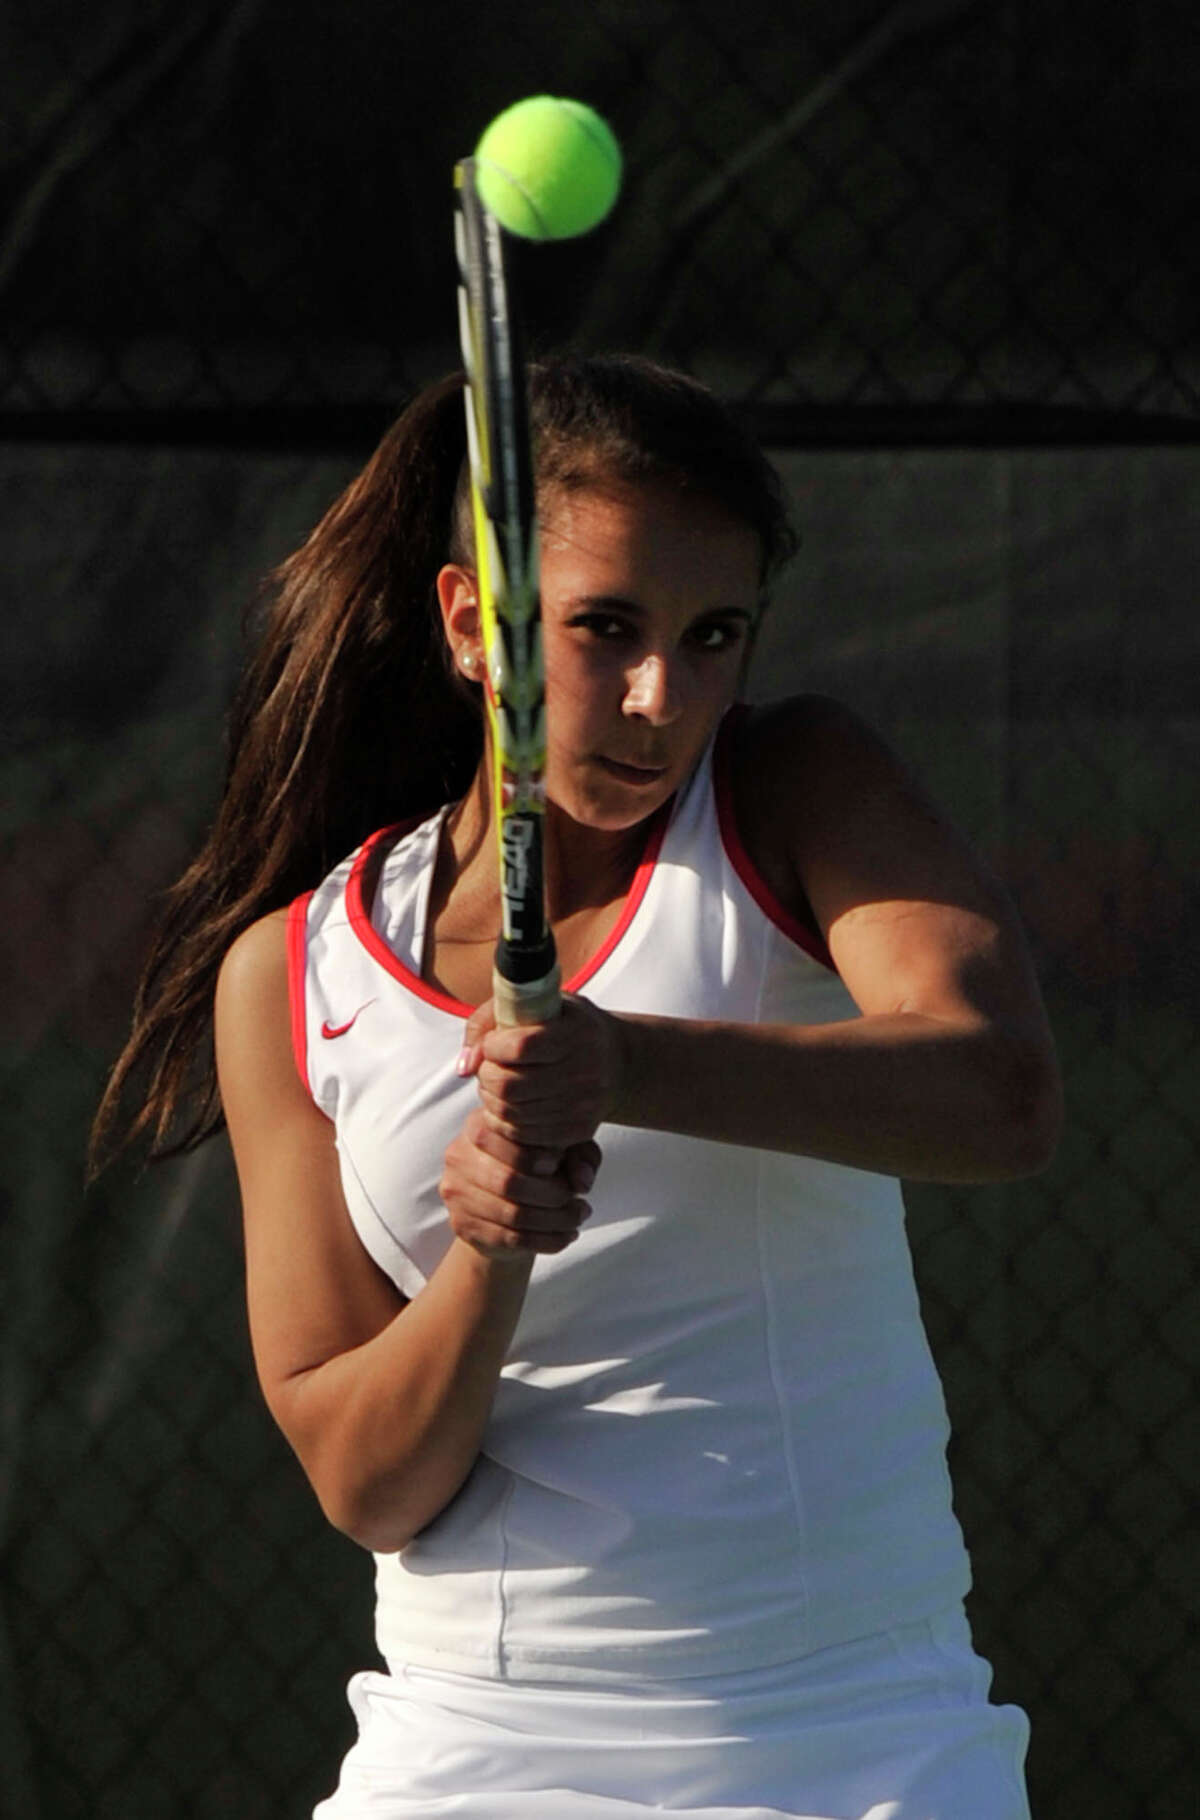 Greenwich's Julia Hyland follows through on her return to the New Canaan side during their doubles tennis match at New Canaan High School on Tuesday, April 9, 2013.